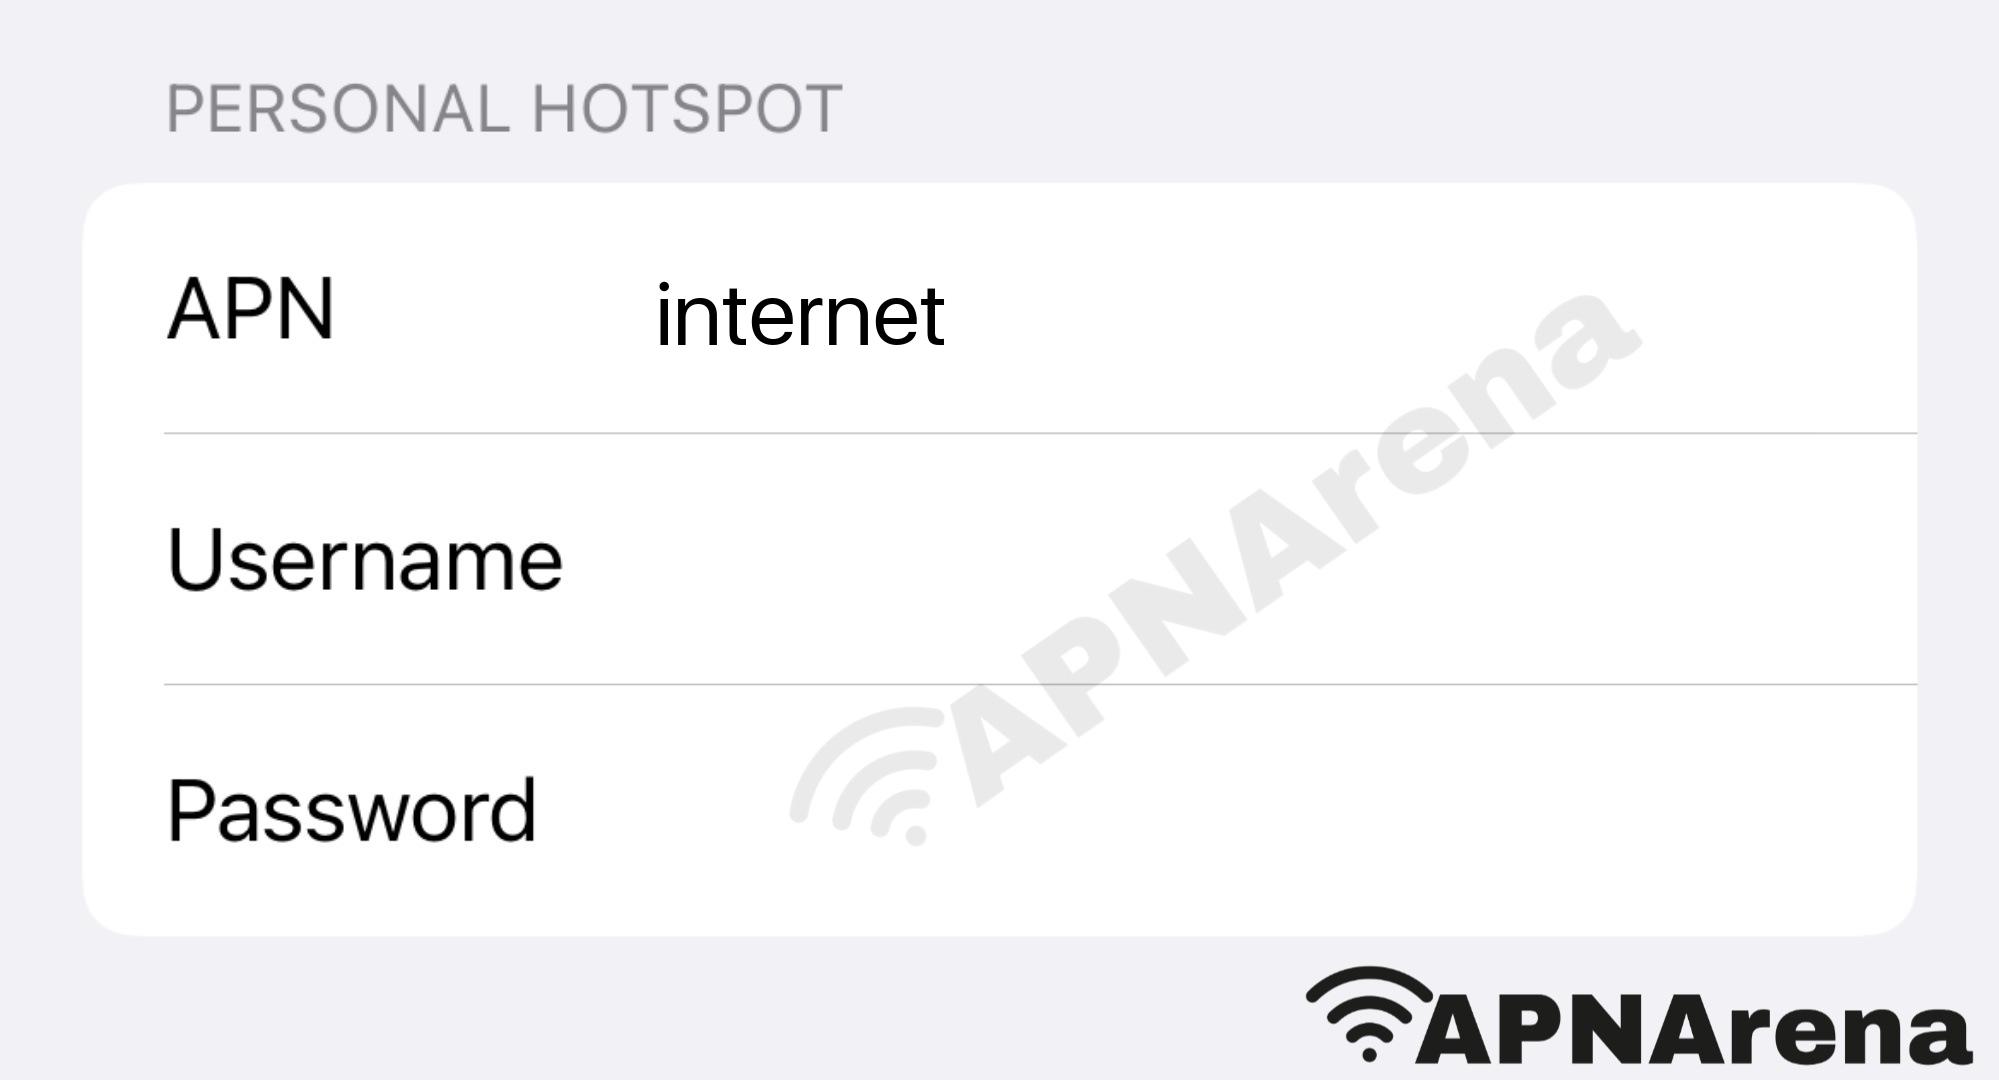 Vodafone Ireland (Eircell) Personal Hotspot Settings for iPhone